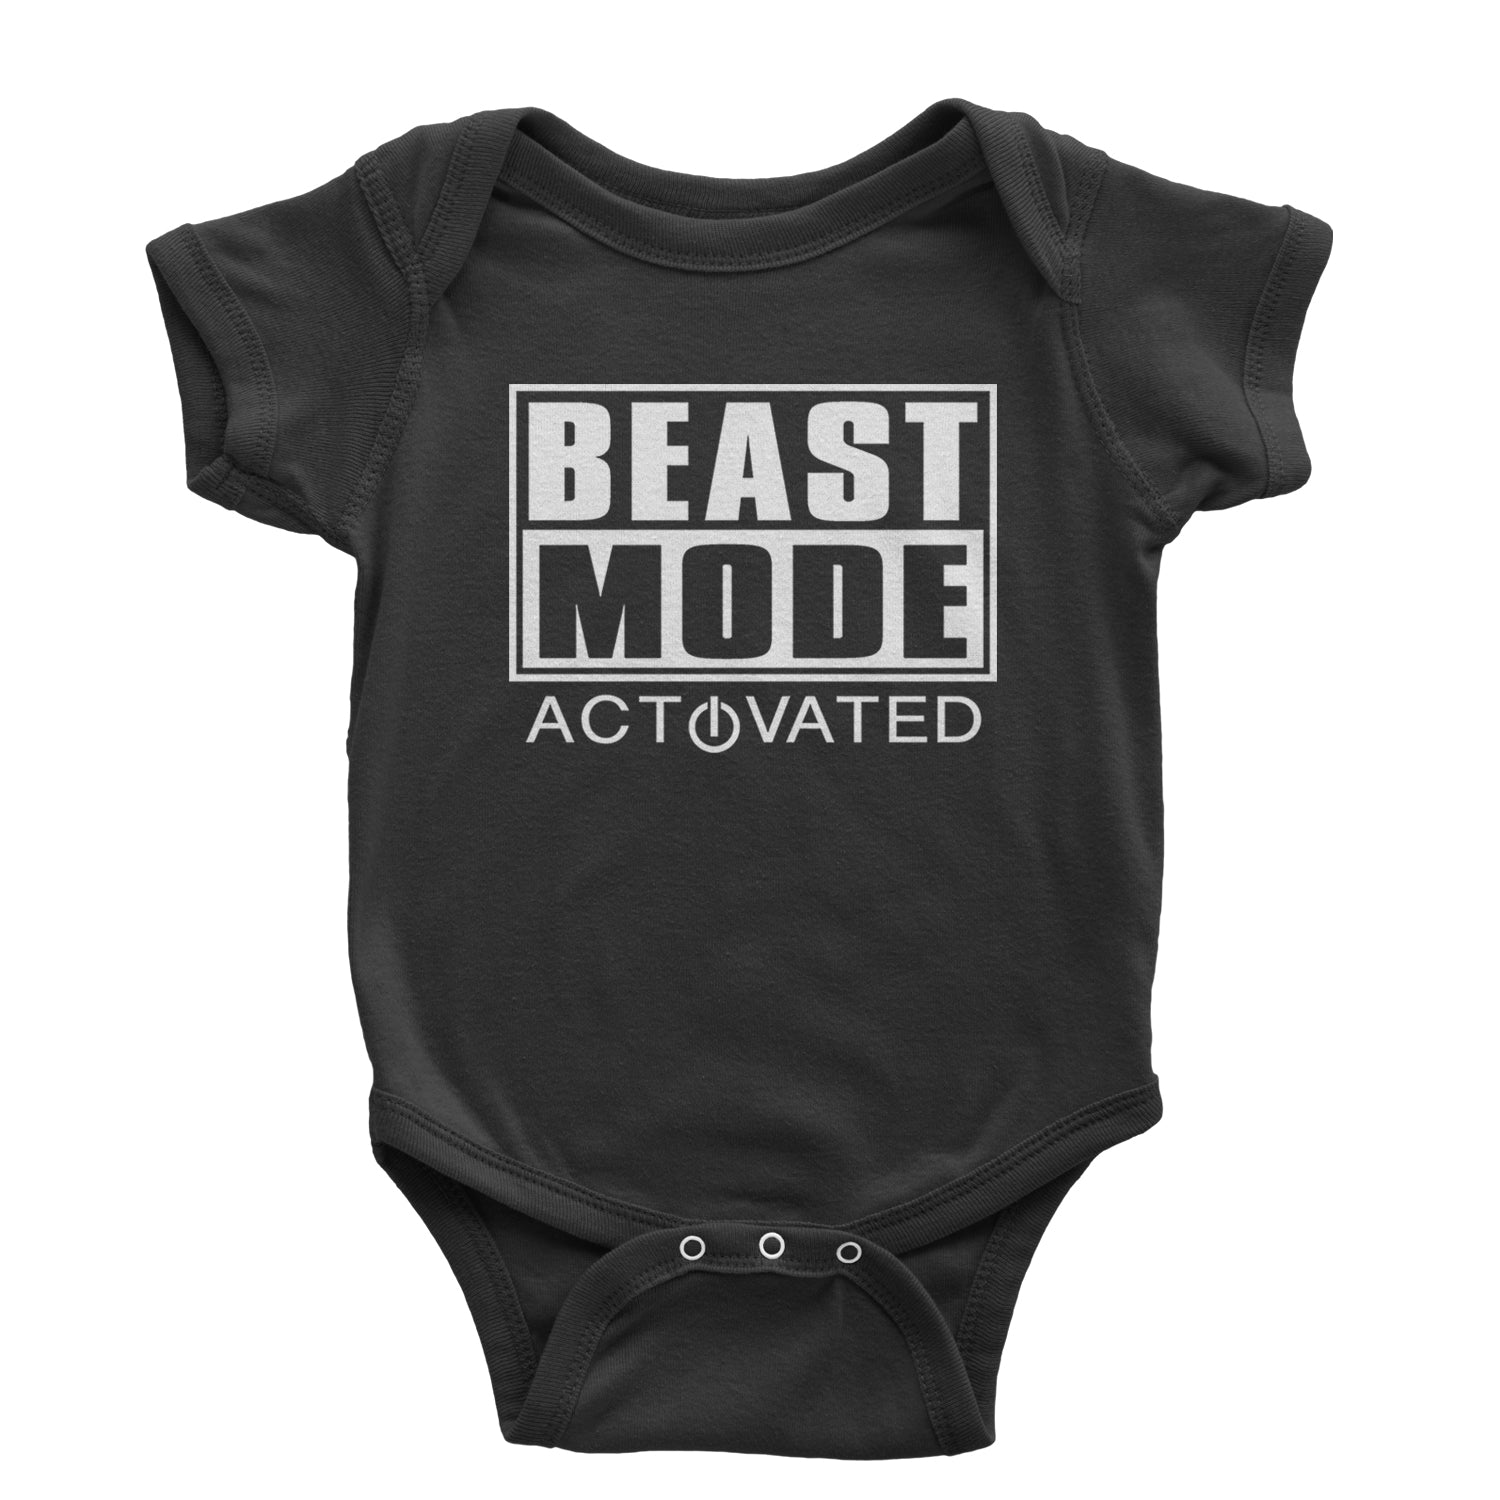 Activated Beast Mode Workout Gym Clothing Infant One-Piece Romper Bodysuit and Toddler T-shirt